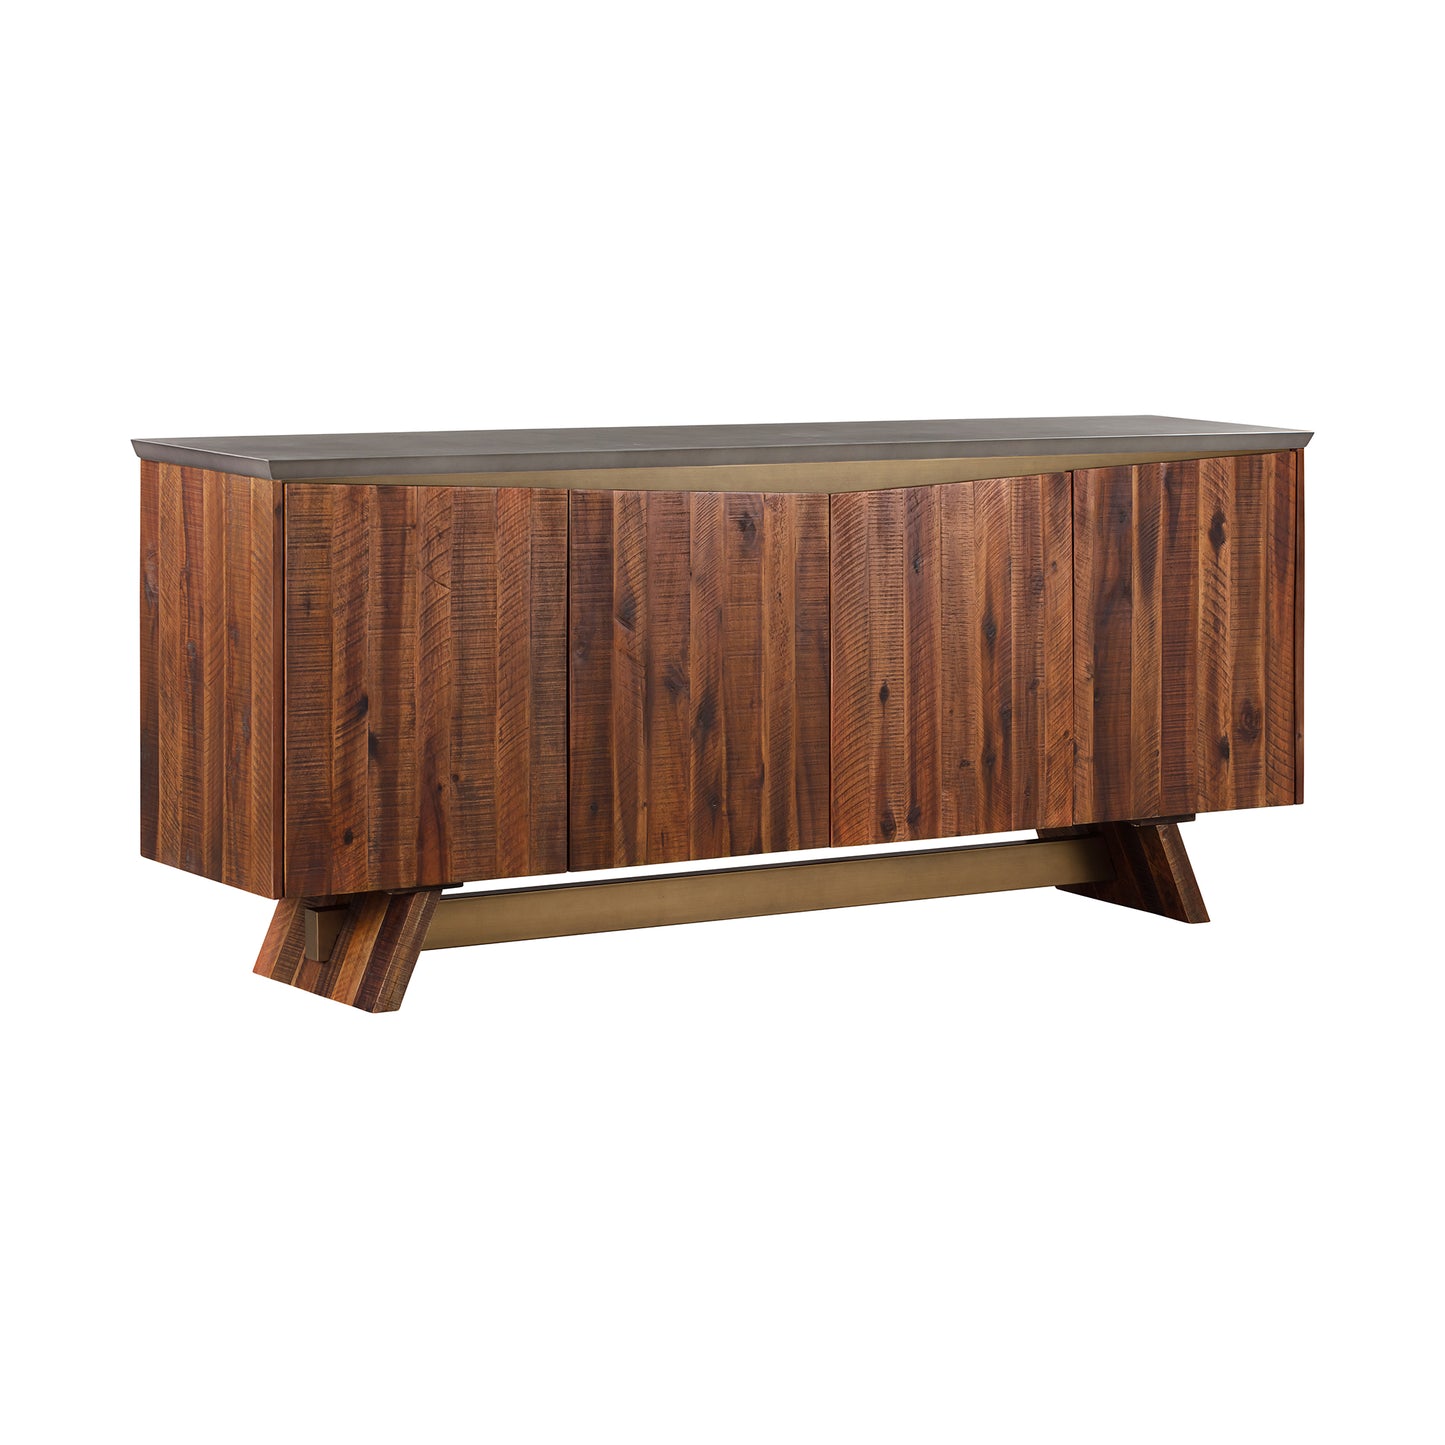 Picadilly 4 Door Sideboard Buffet in Acacia Wood and Concrete